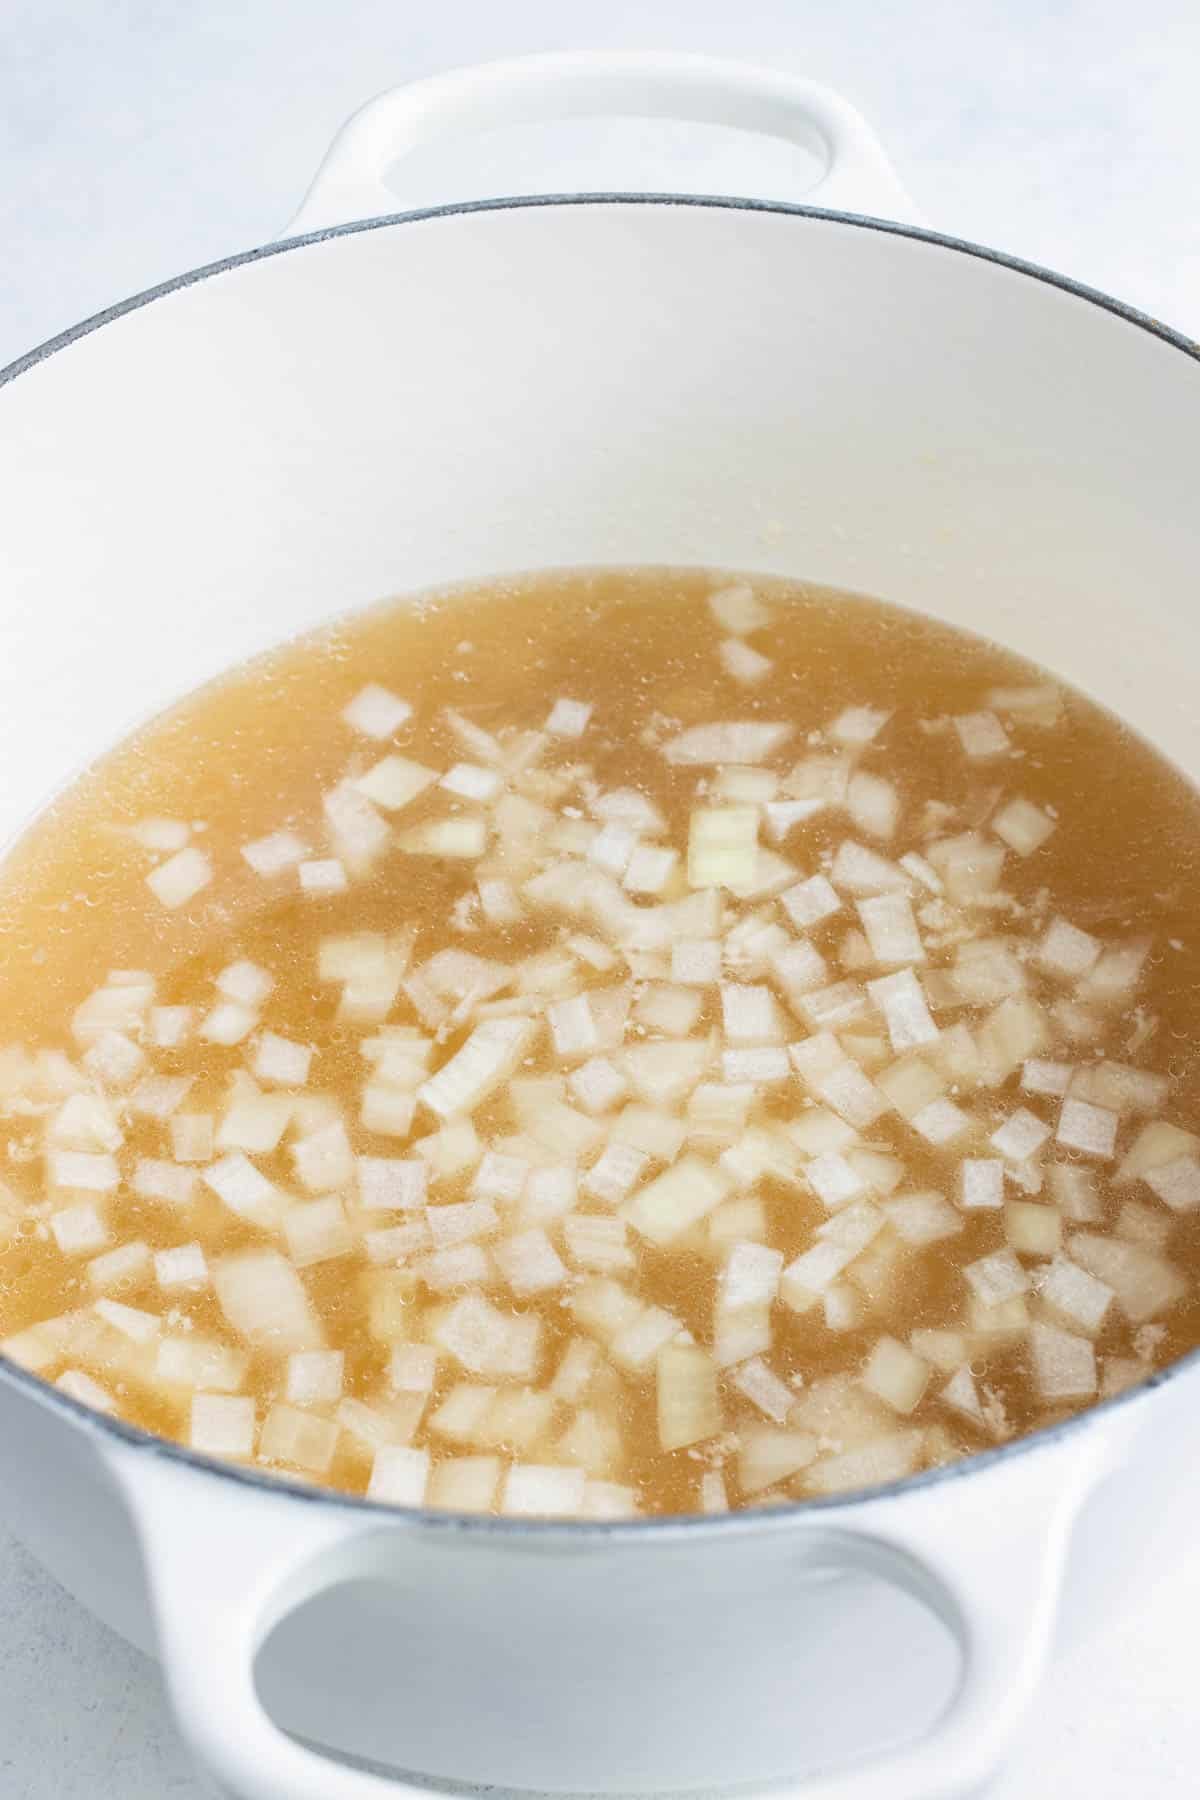 Broth and onions cook together.